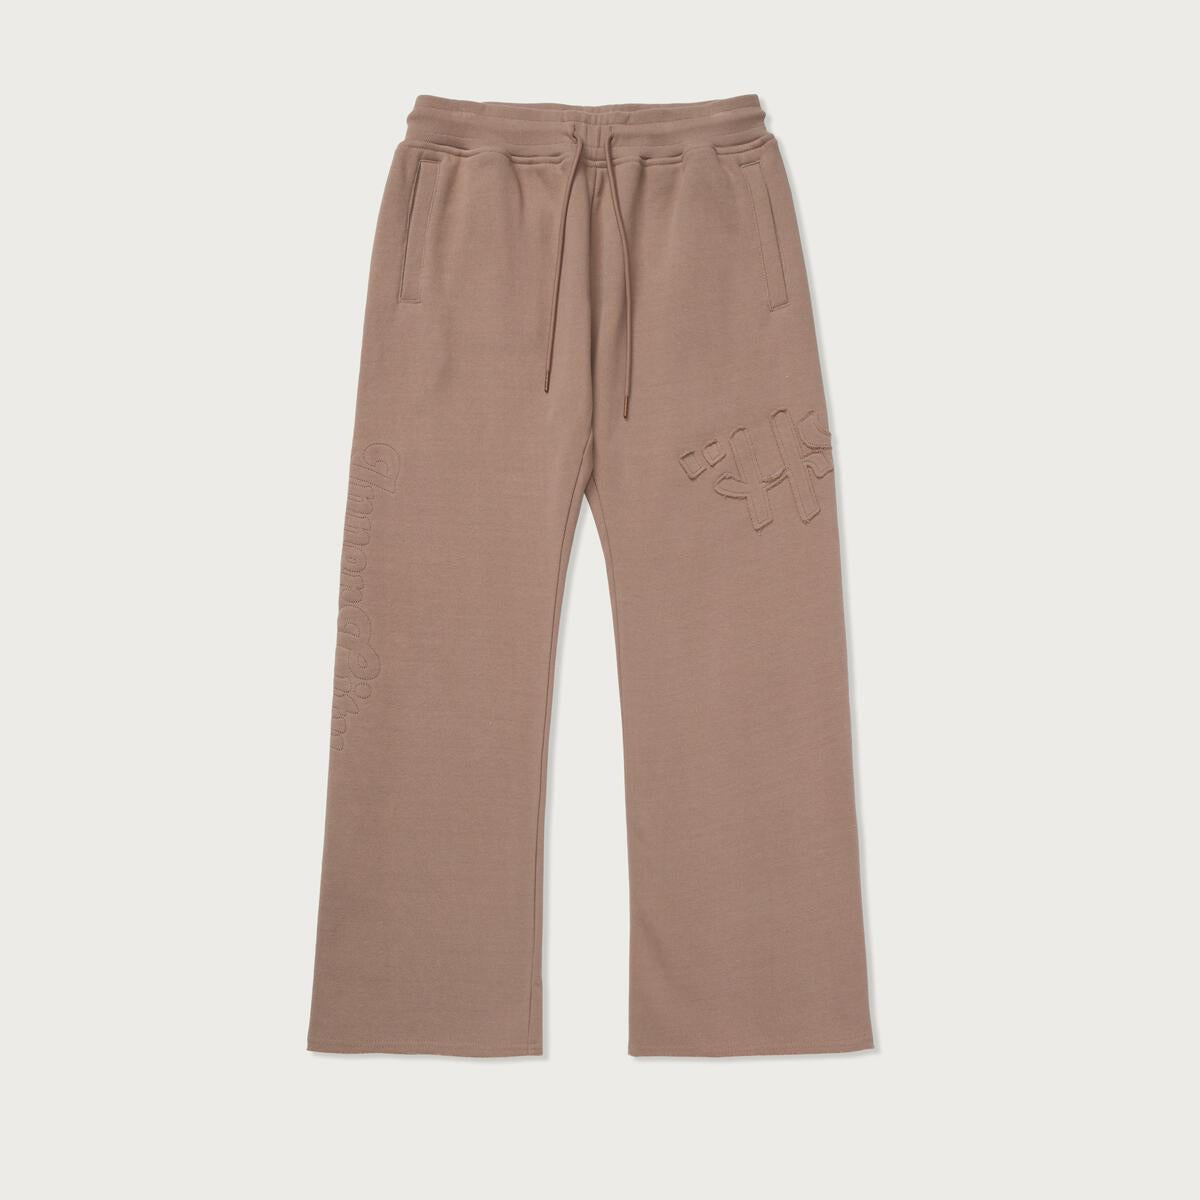 Honor The Gift Script Embroidered Sweats Light Brown